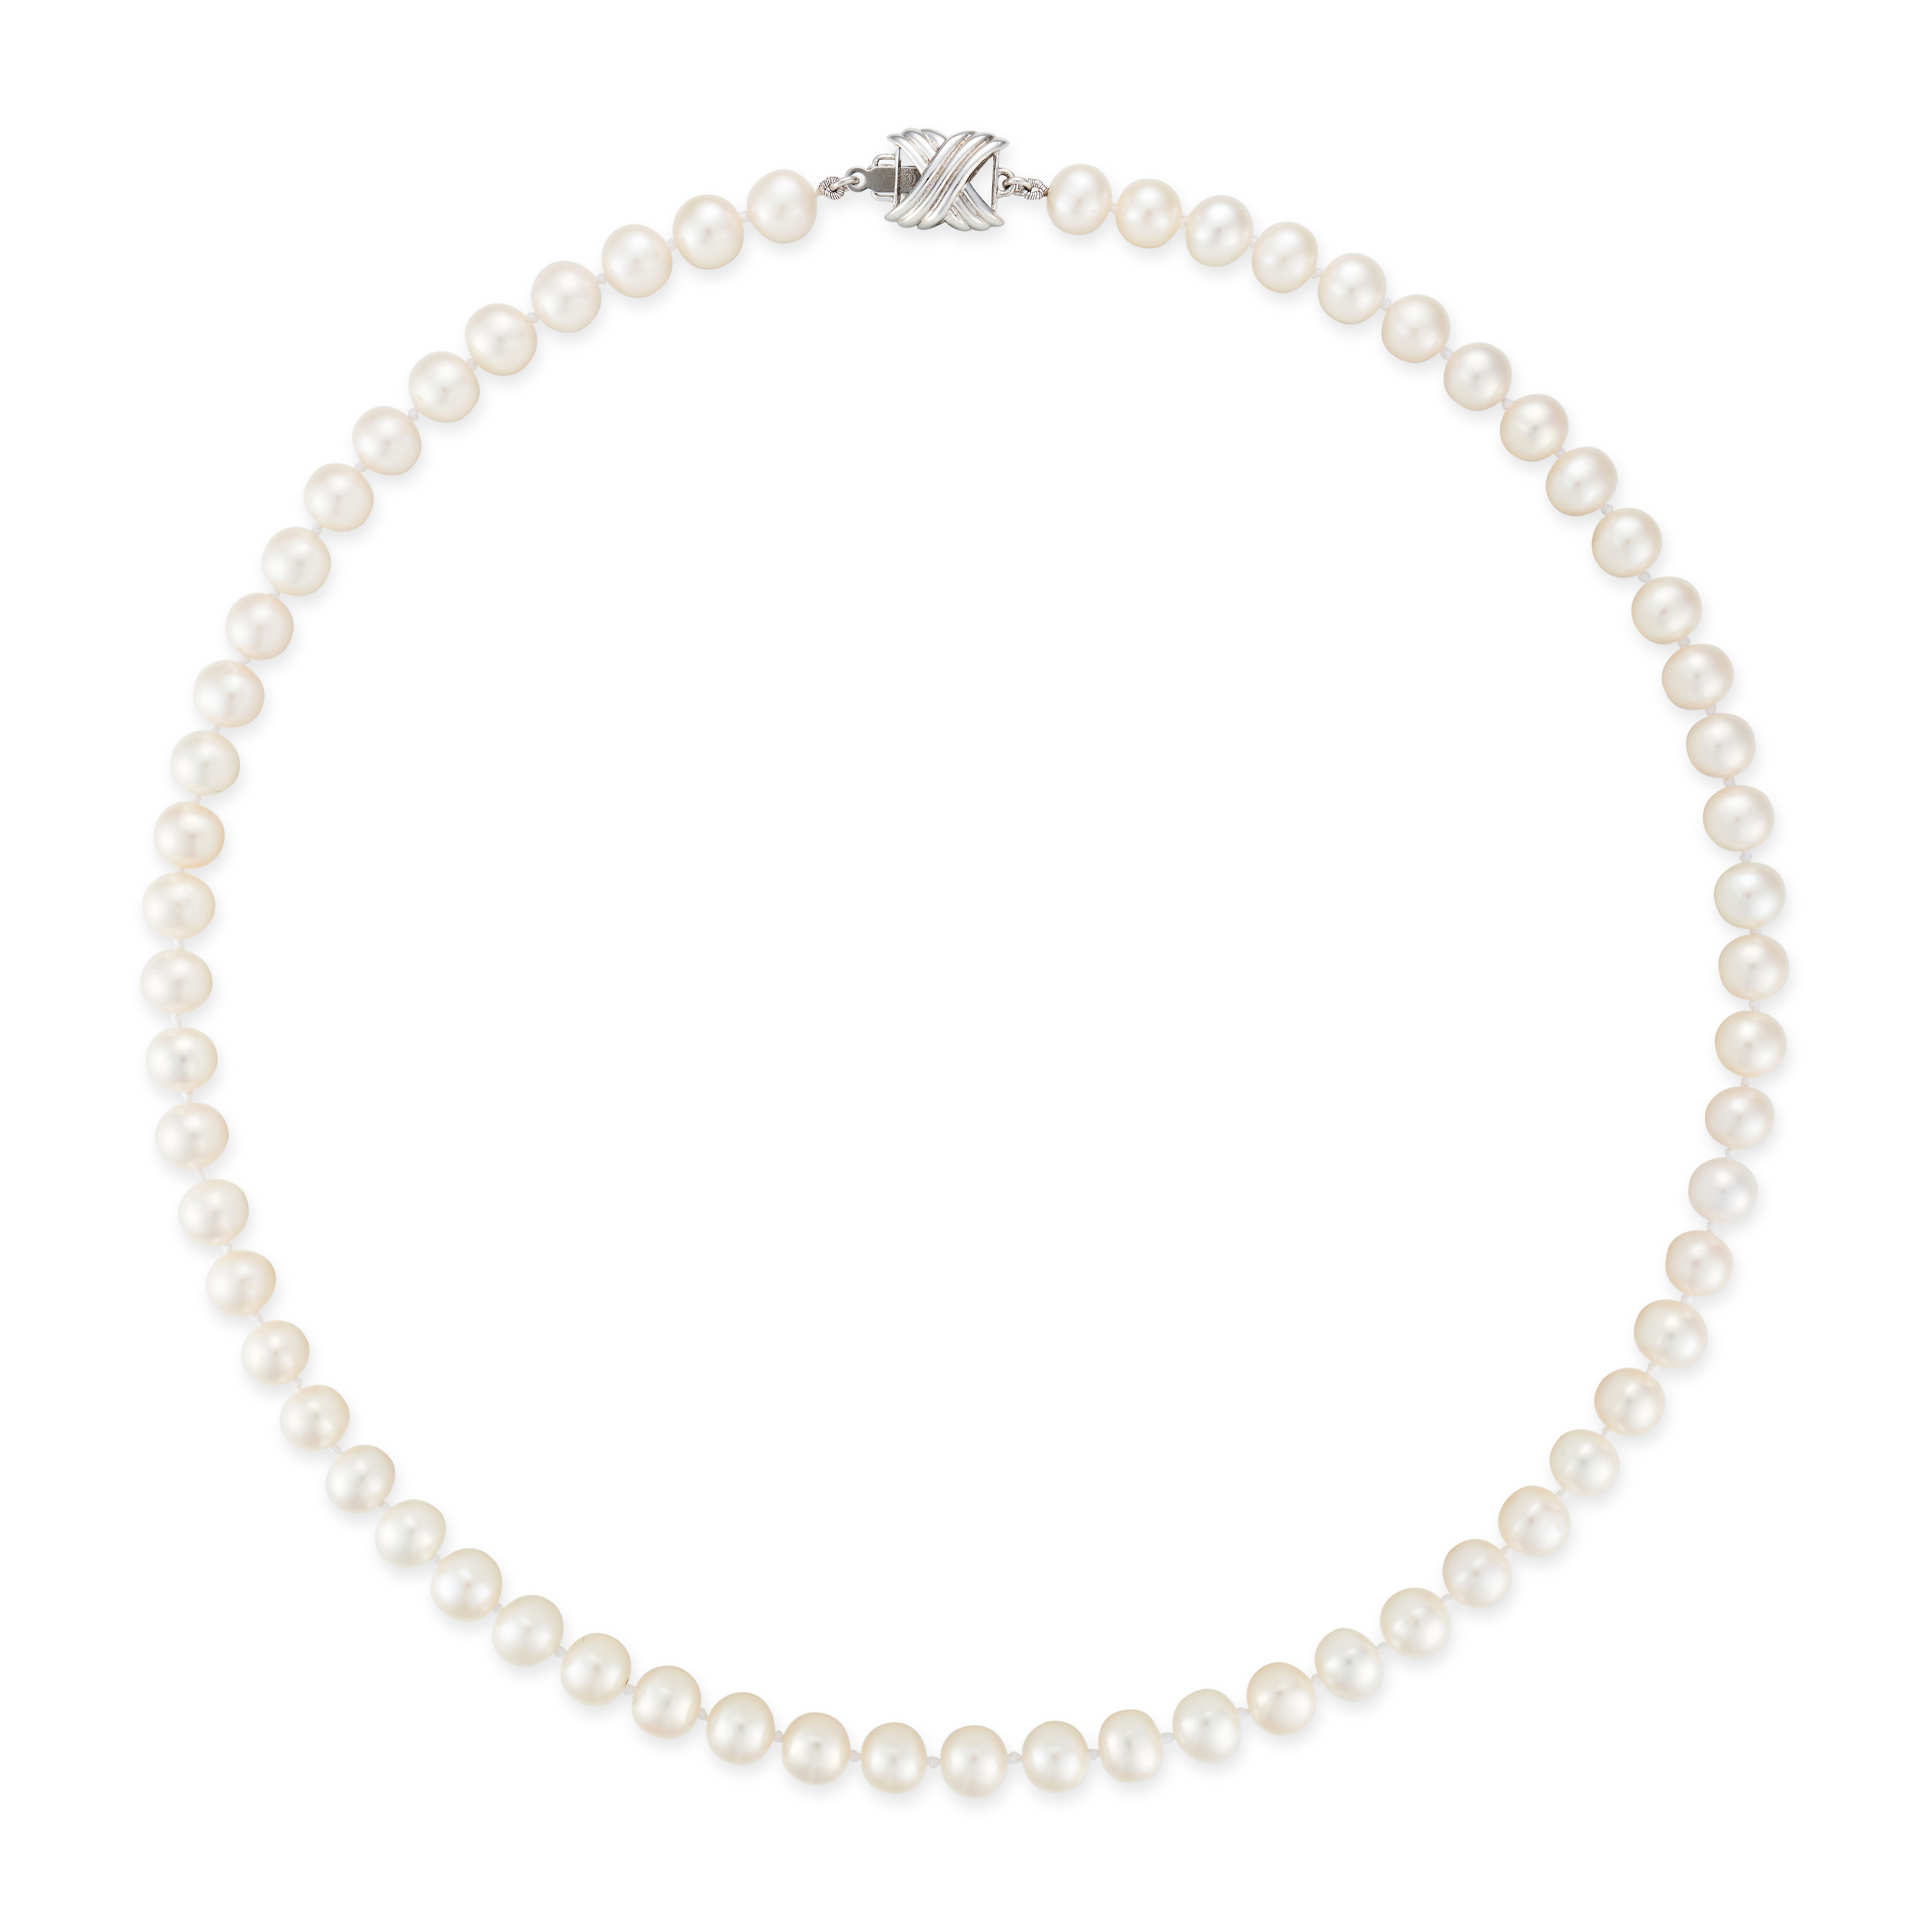 NO RESERVE - A PEARL NECKLACE comprising a single row of pearls, stamped 925, 47.0cm, 27.9g.